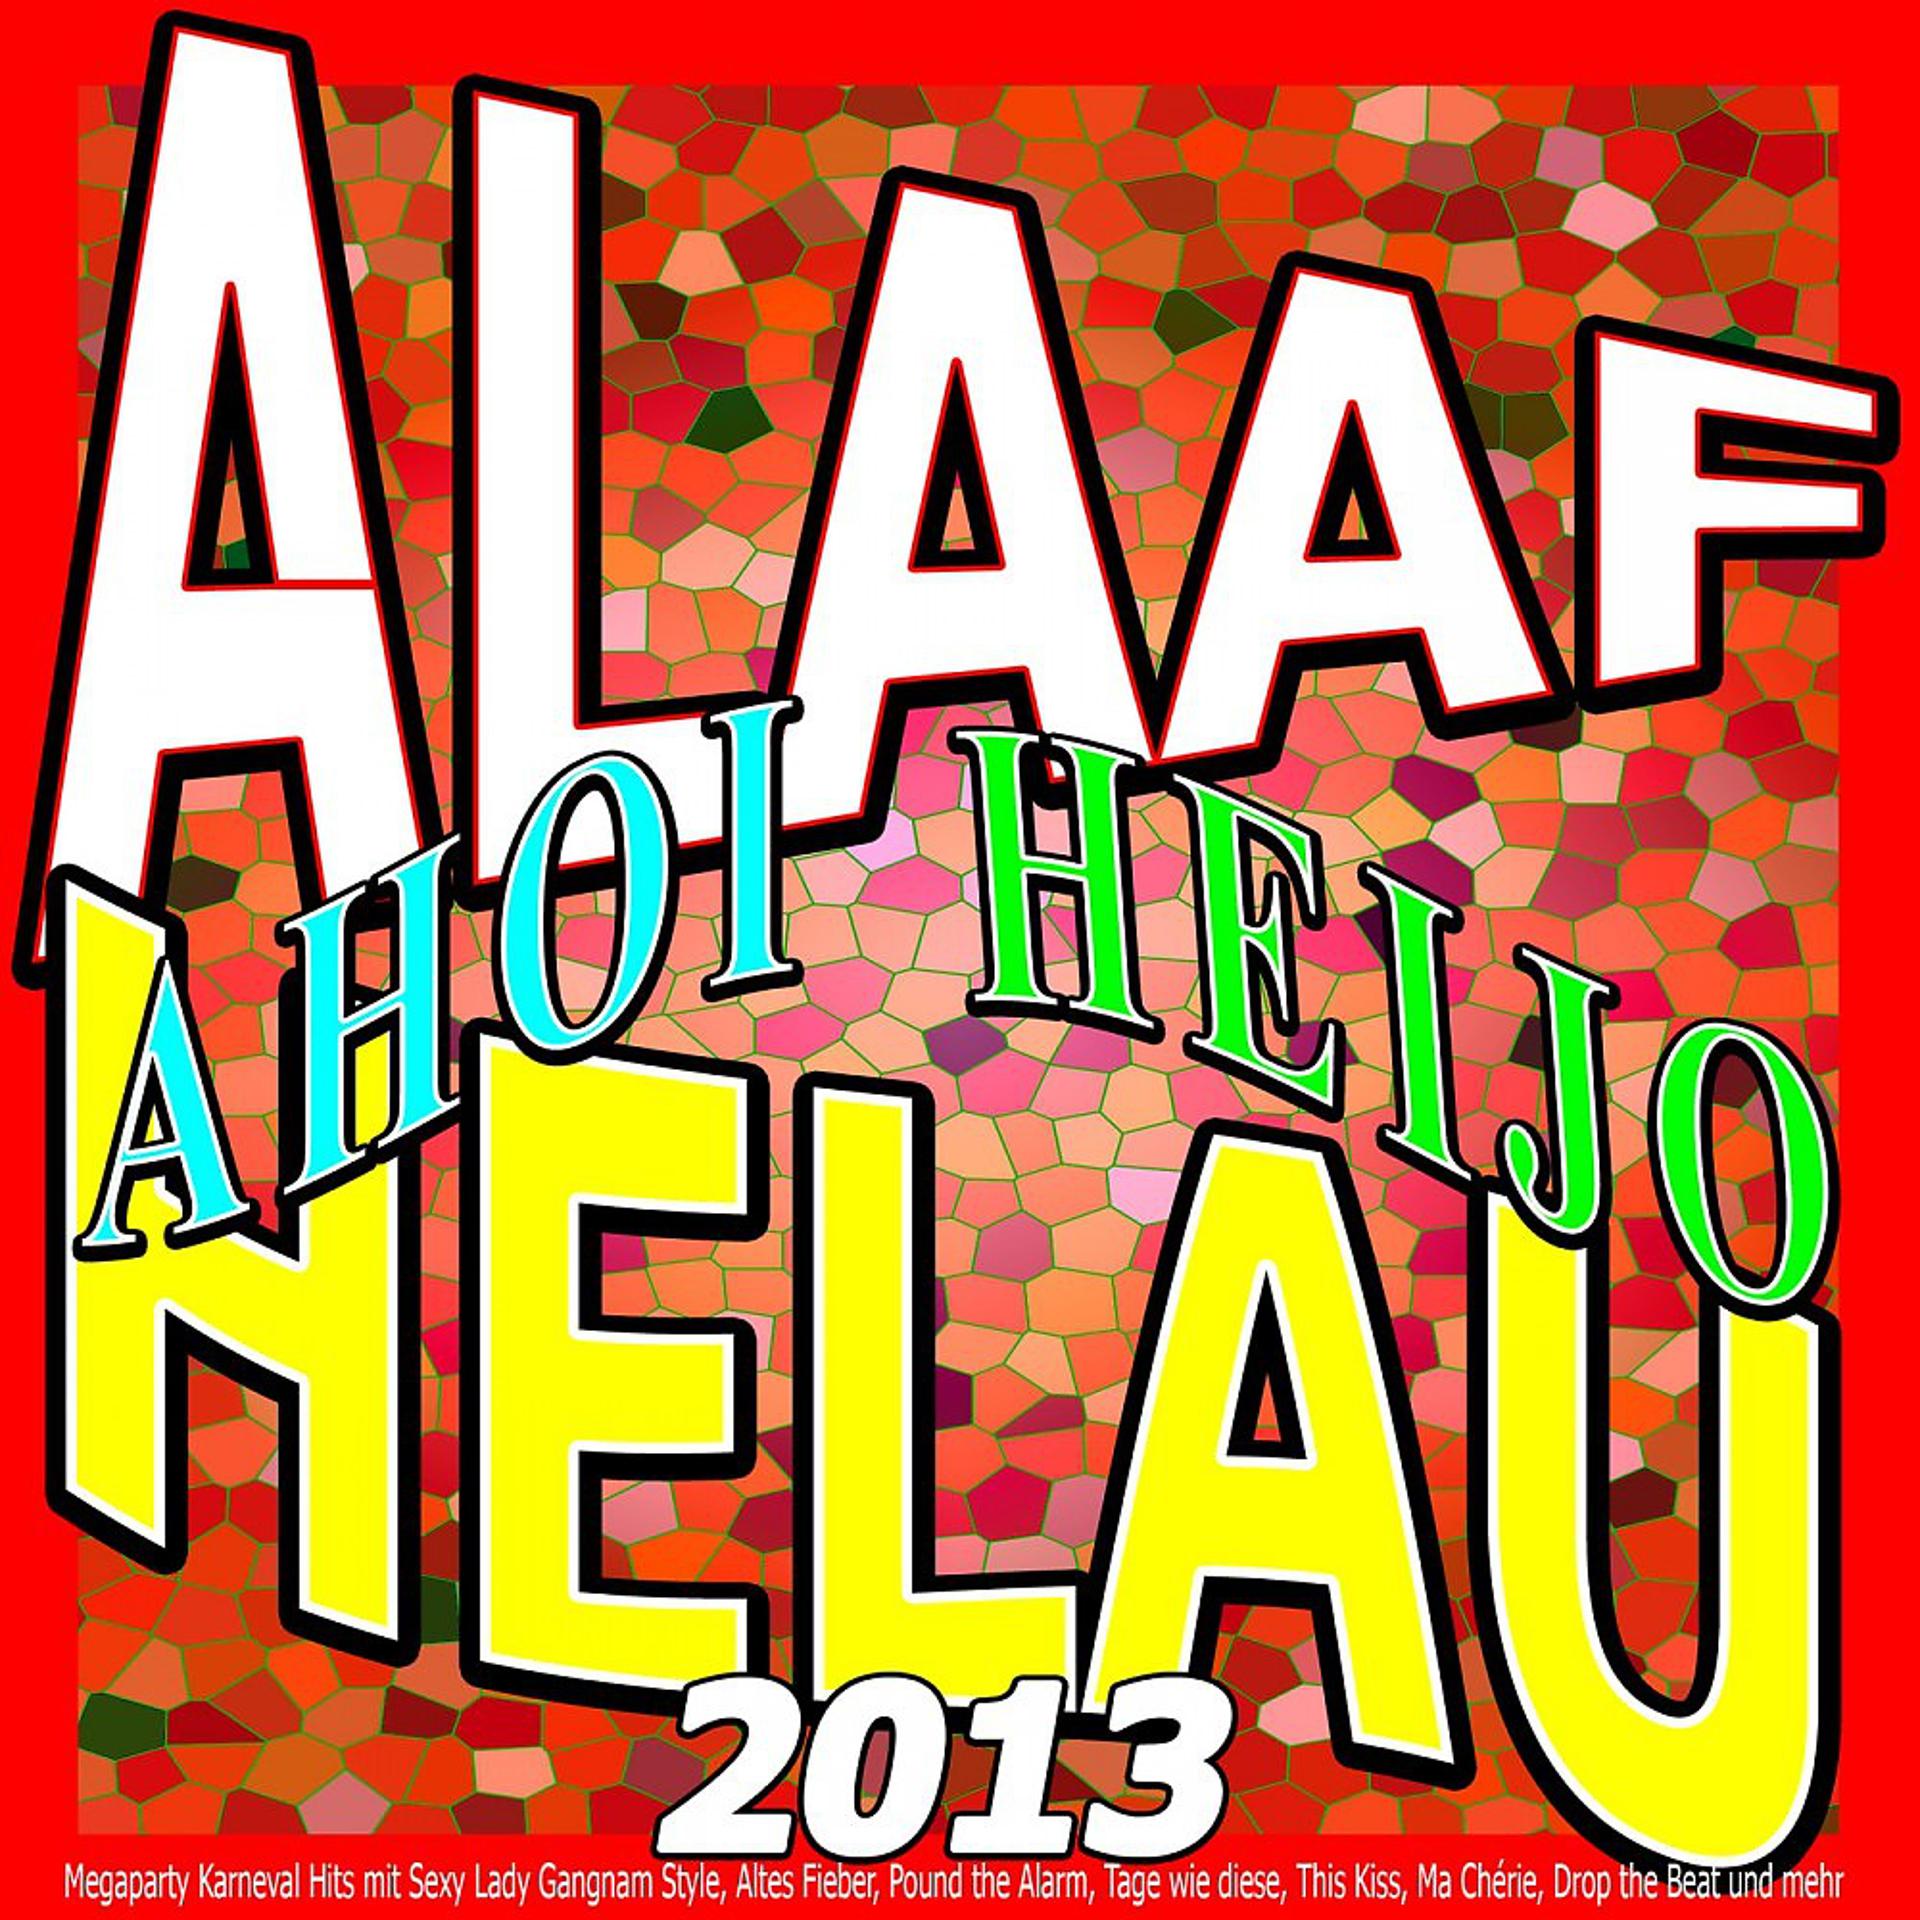 Постер альбома Alaaf Helau Ahoi Heijo 2013 (Megaparty Karneval Hits mit Sexy Lady Gangnam Style, Altes Fieber, Pound the Alarm, Tage wie diese, This Kiss, Ma Chérie, Drop the Beat und mehr)